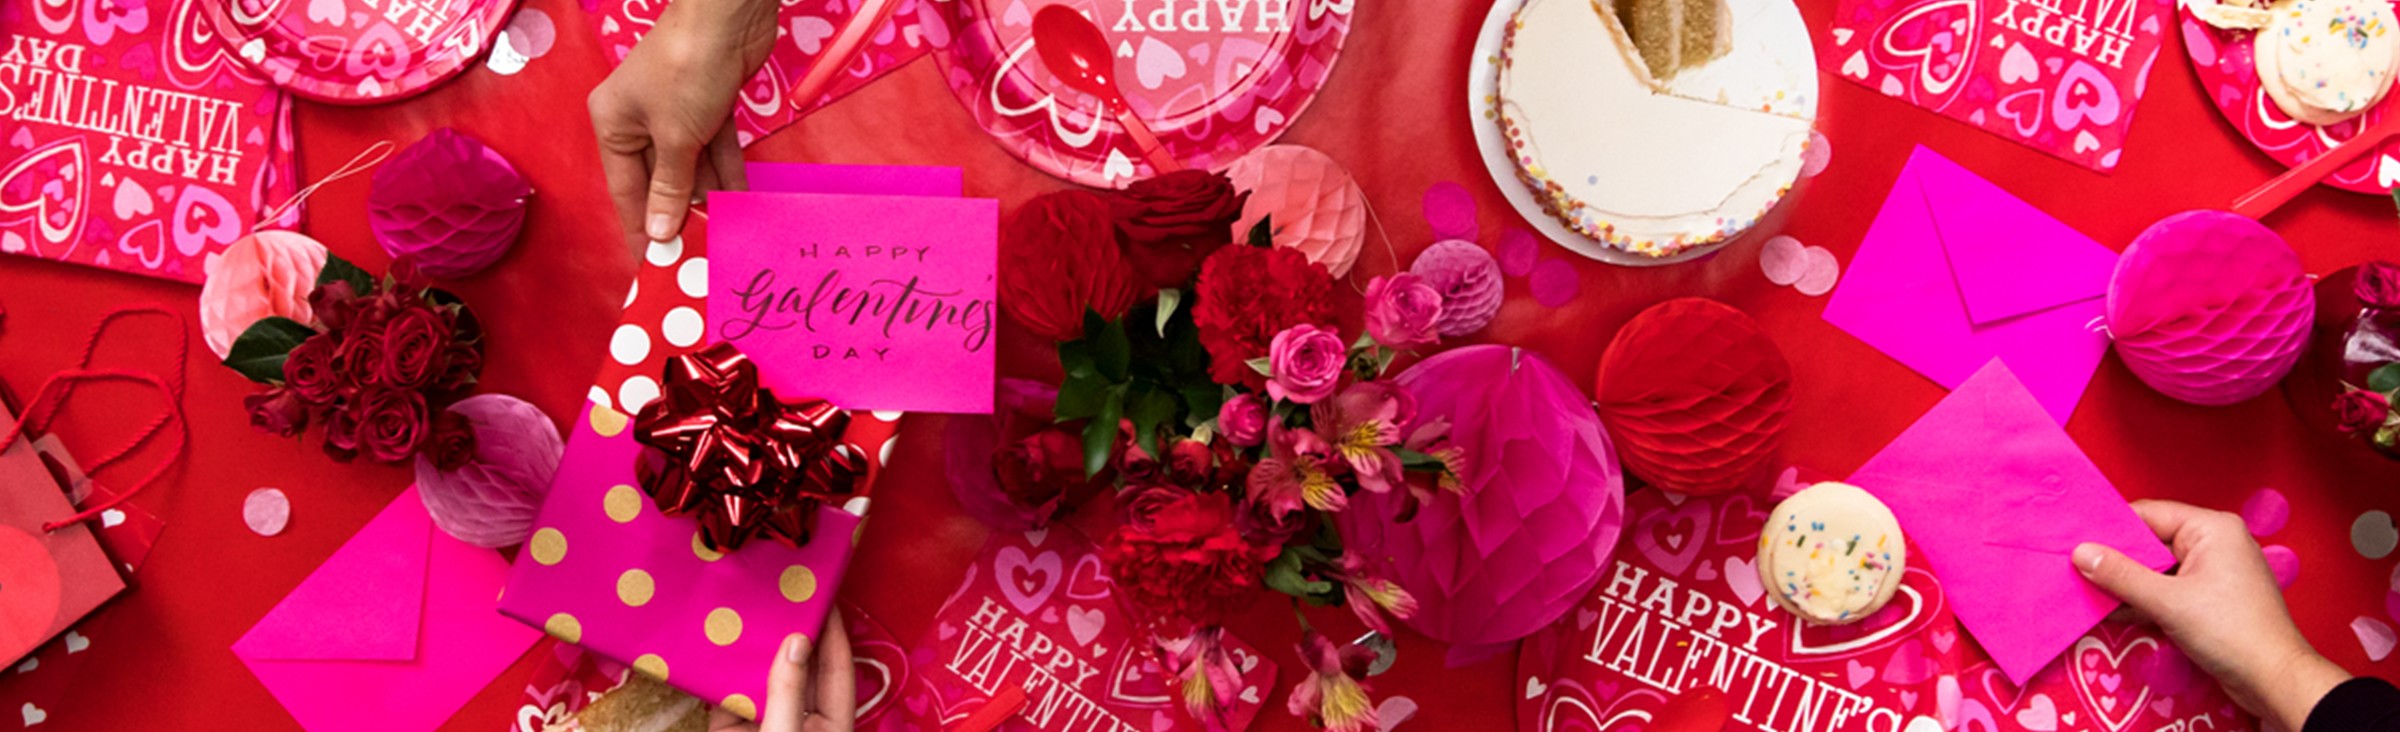 Galentine S Day Ideas To Celebrate American Greetings